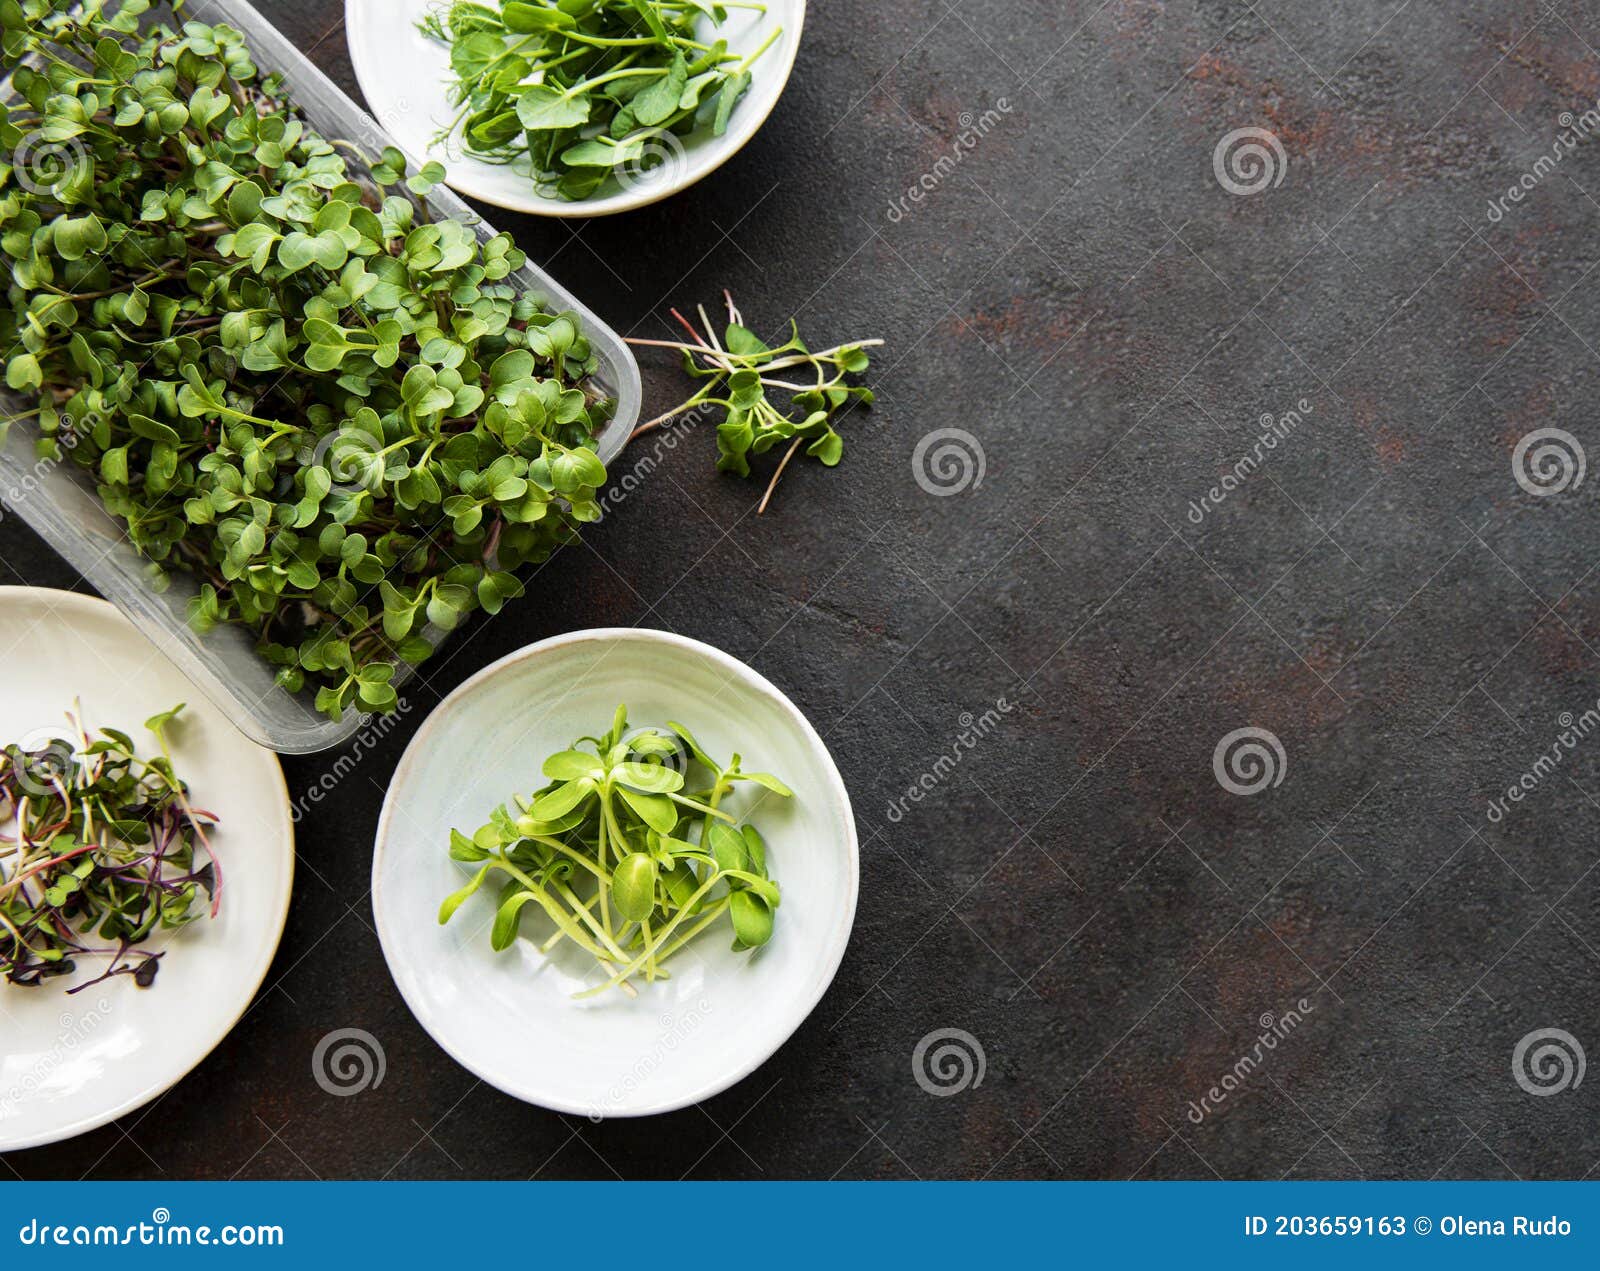 assortment of micro greens at black background, copy space, top view